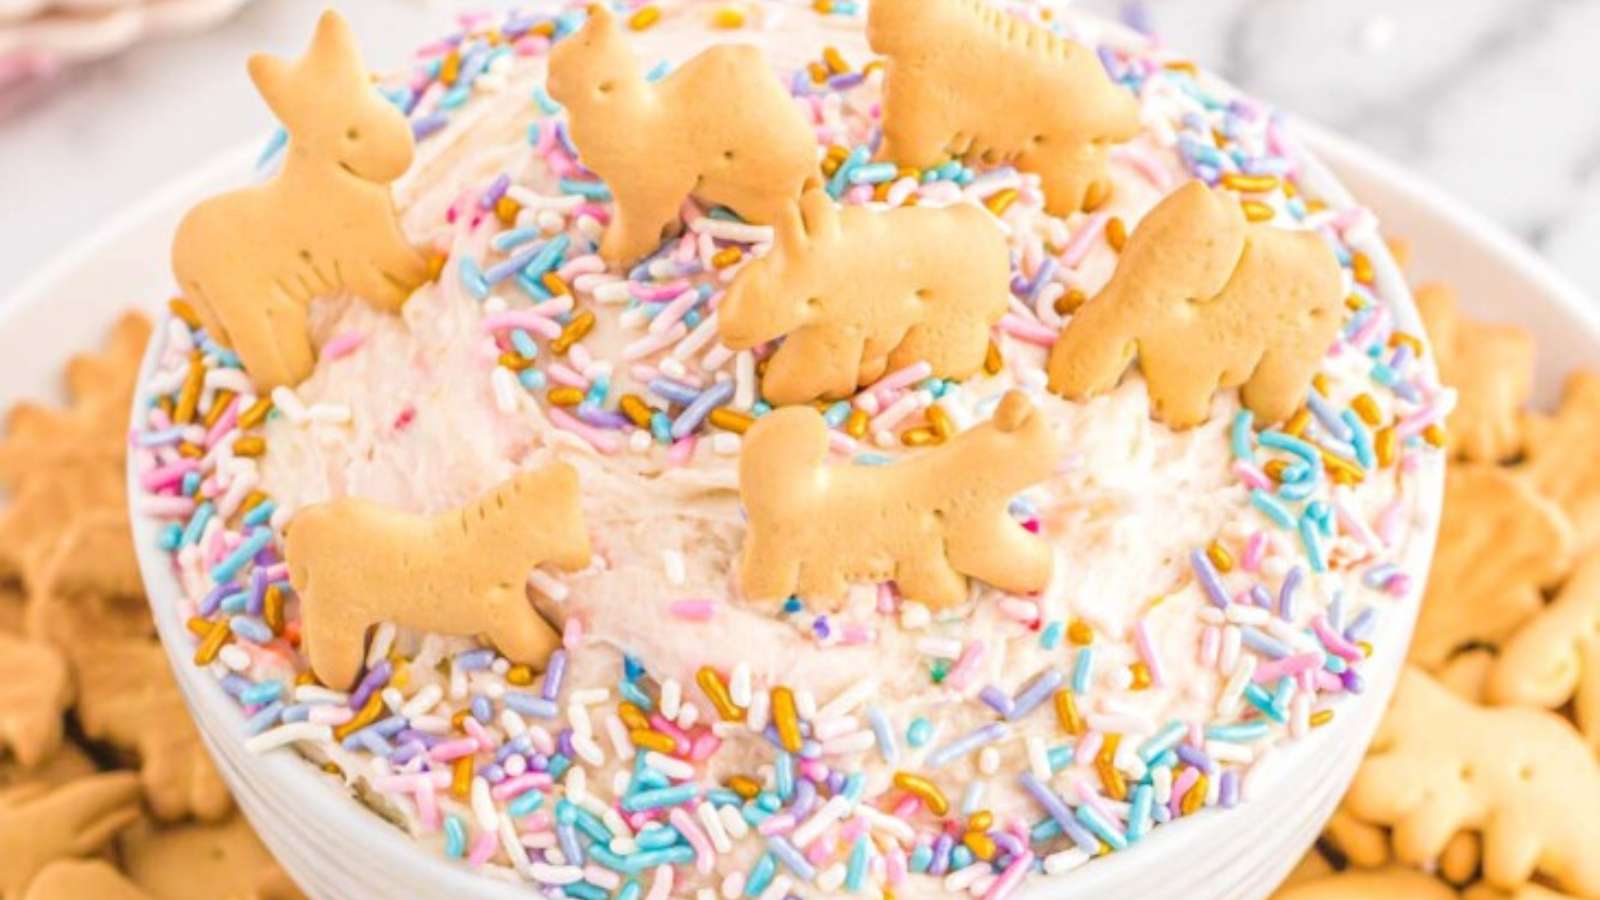 A cake dip with sprinkles and animal cookies.